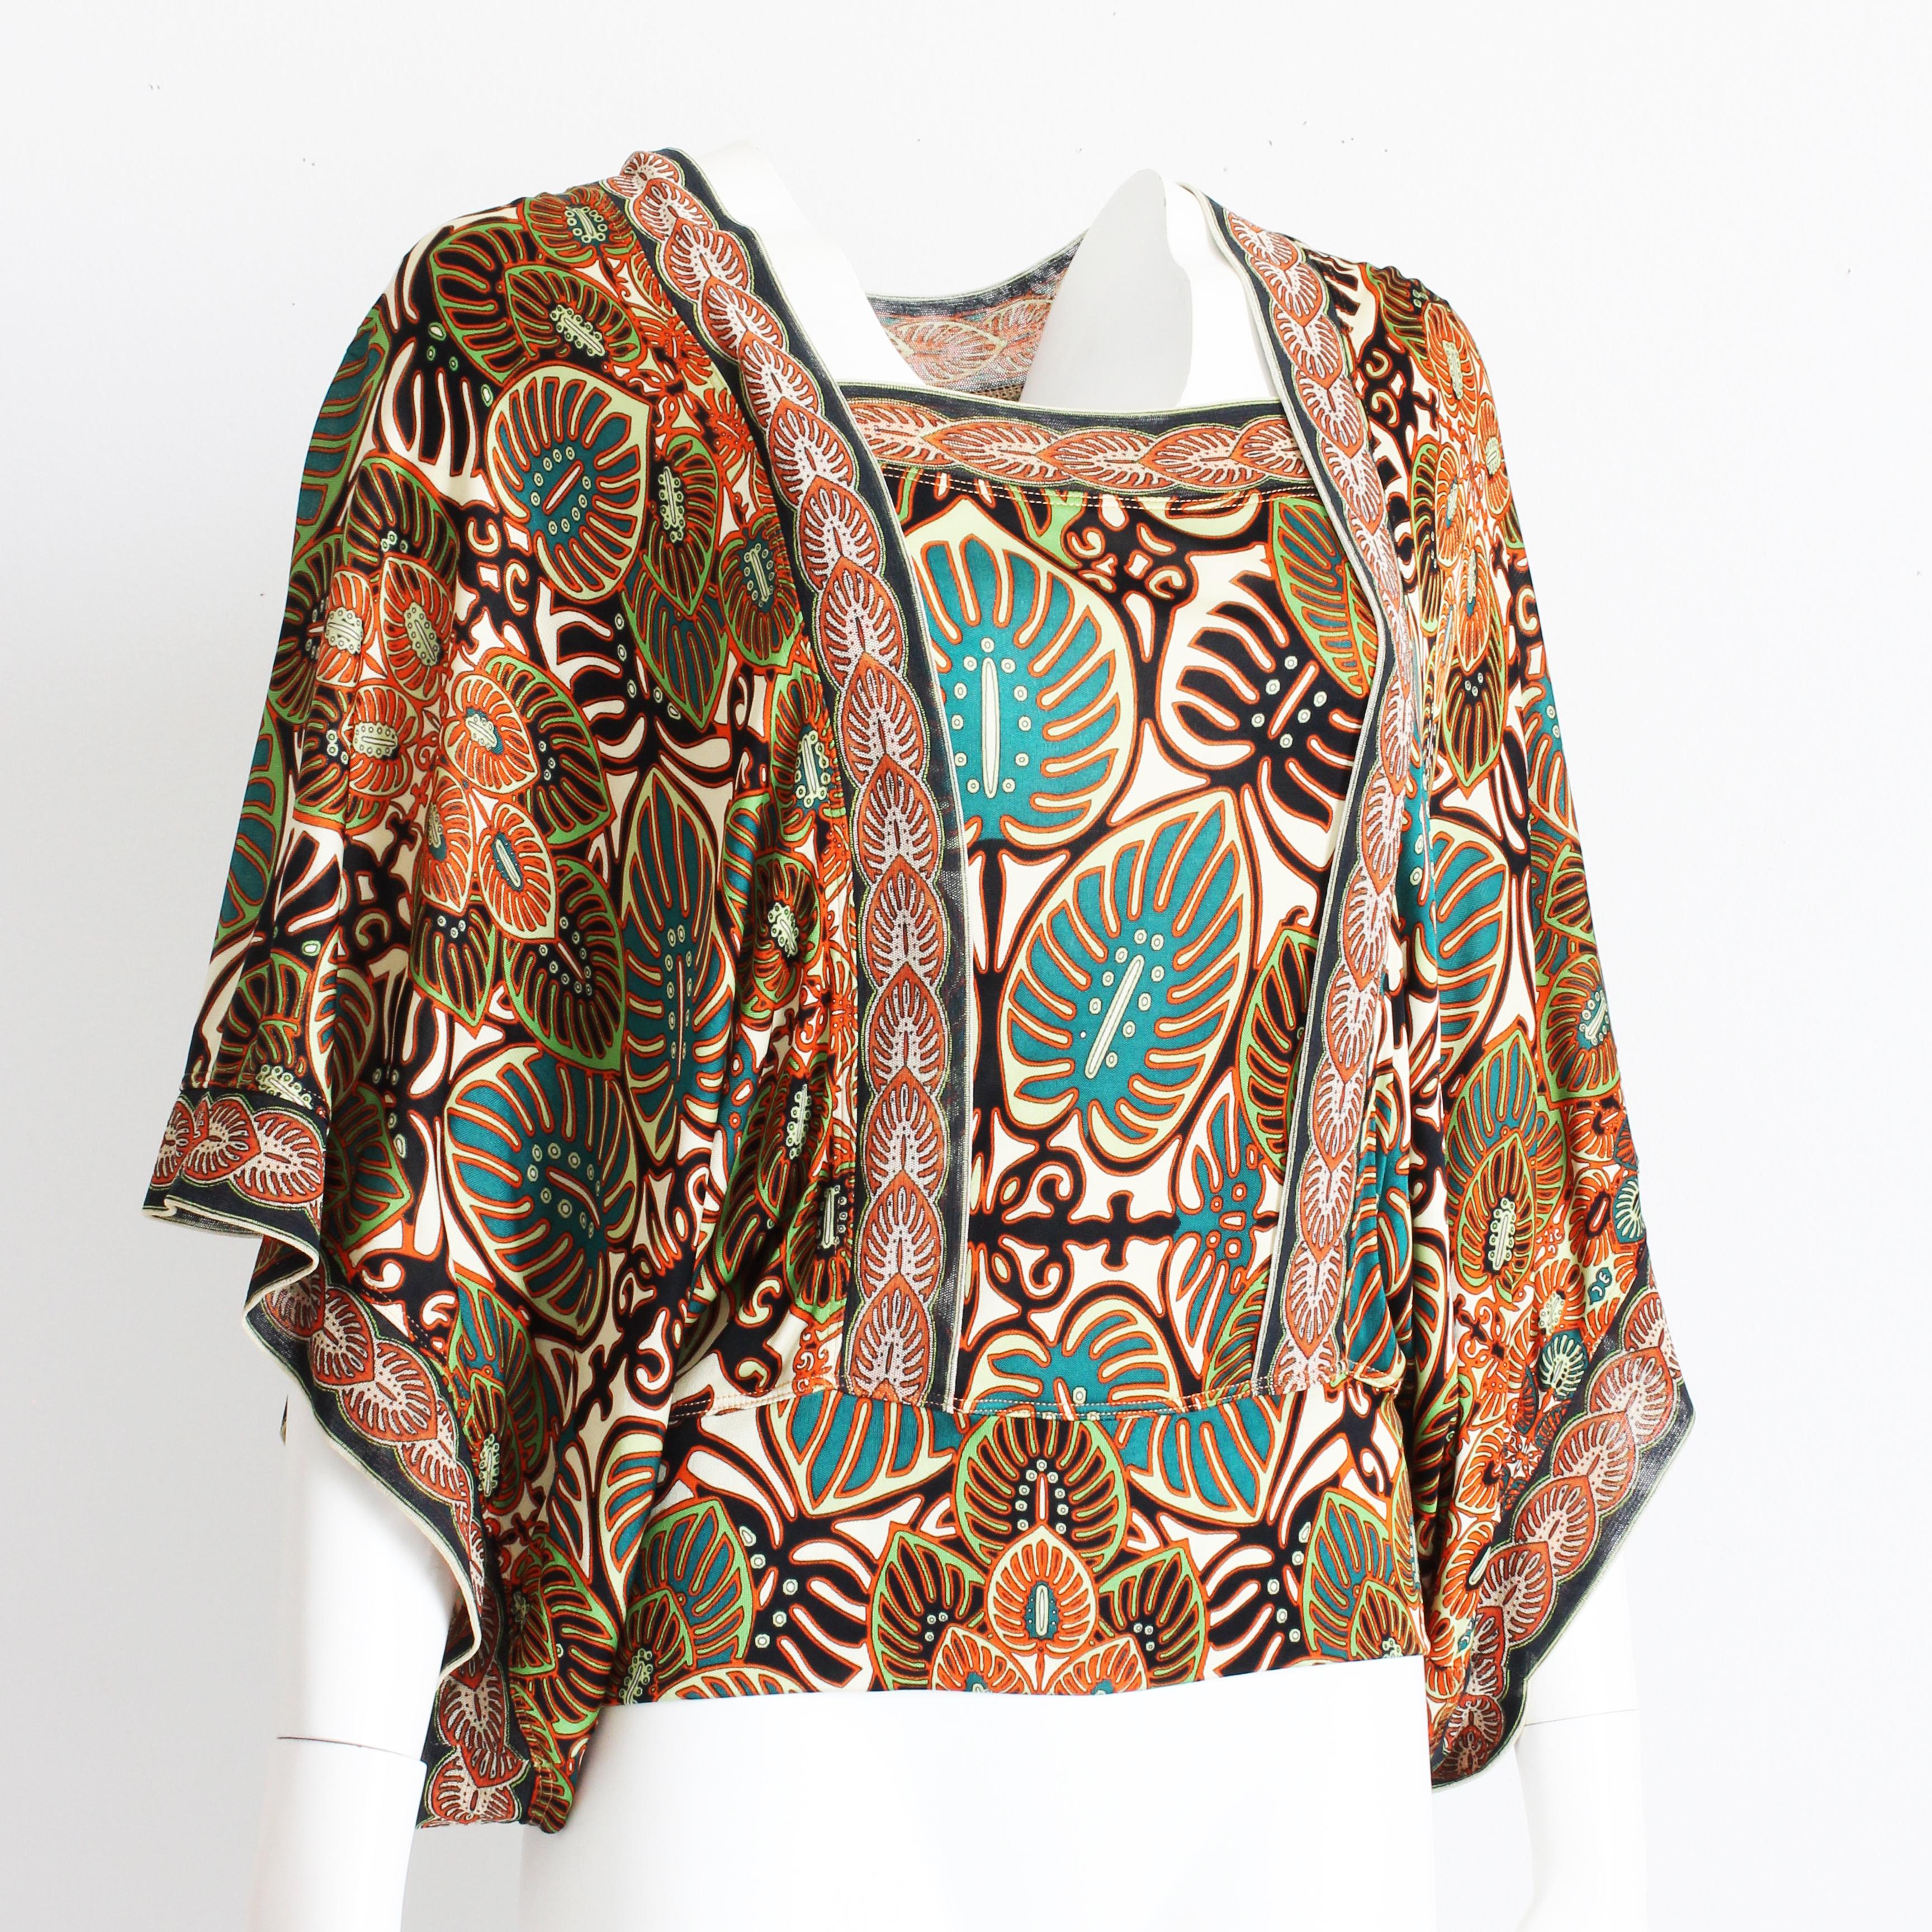 Authentic, preowned, vintage Jean Paul Gaultier angel sleeve blouse, likely made in the 90s. Made from a fabulously vibrant abstract print mesh fabric in shades of red, orange, teal and black, it features gorgeous flutter angel sleeves and slips